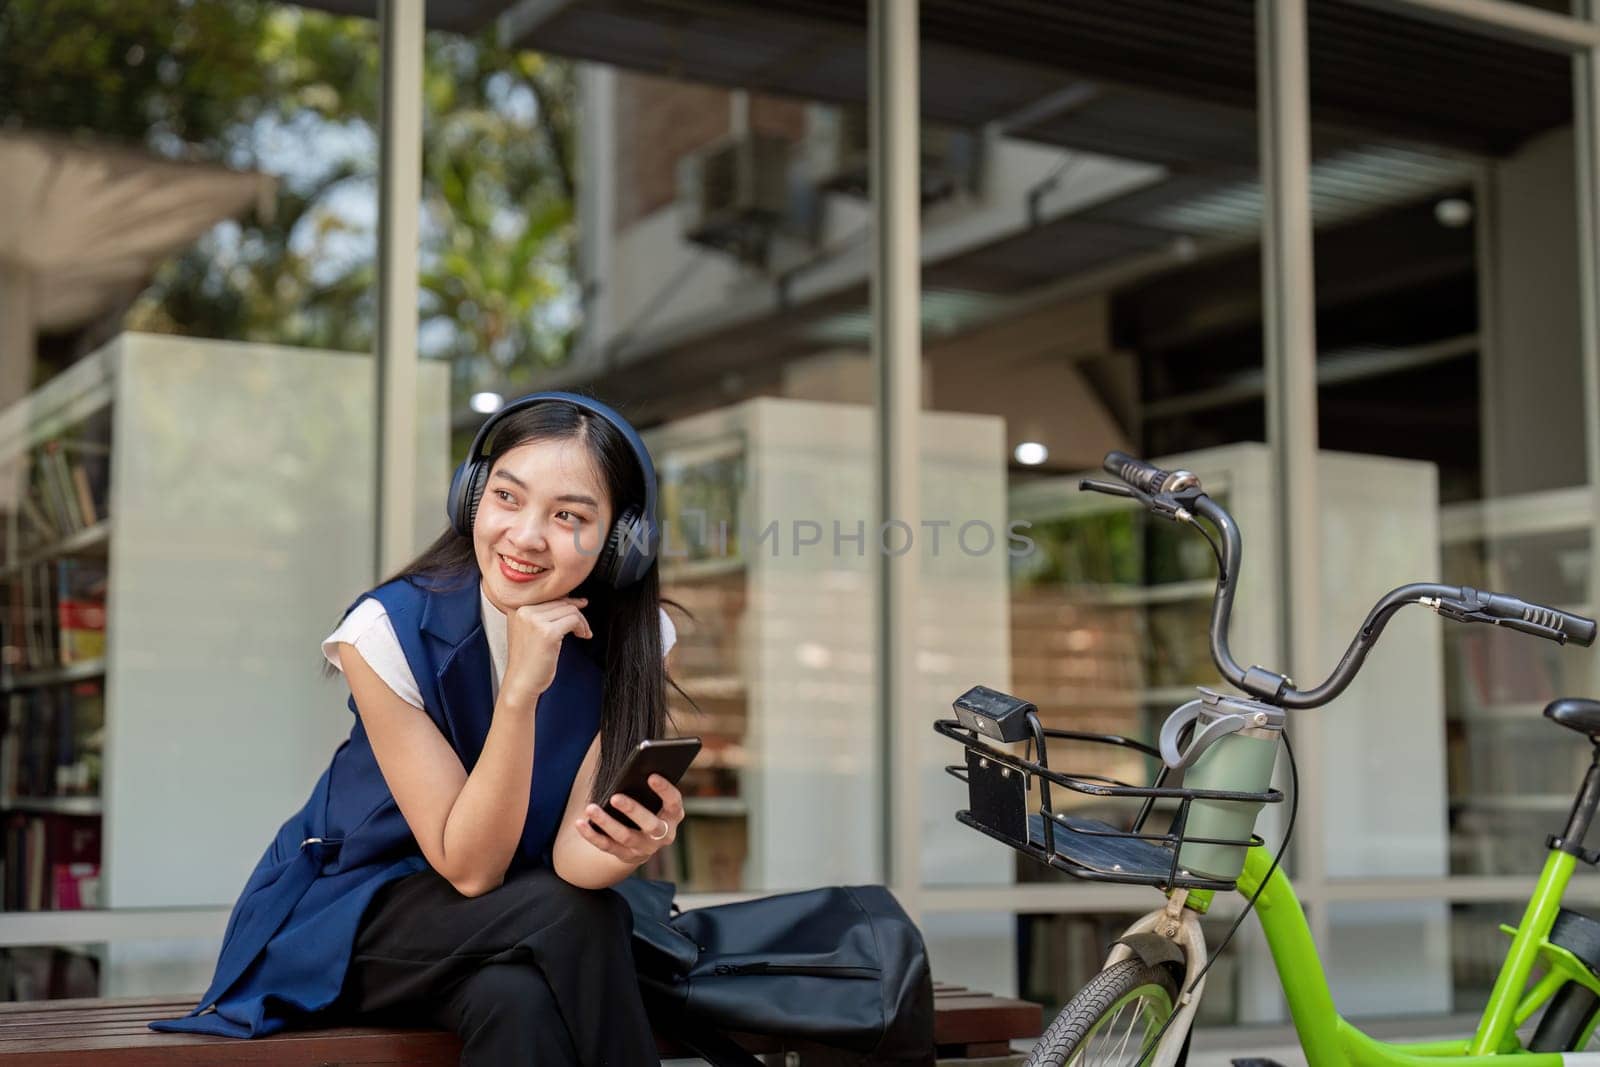 Smiling businesswoman with headphones relaxing with her bicycle outside office. Concept of modern urban commuting, relaxation, and productivity.